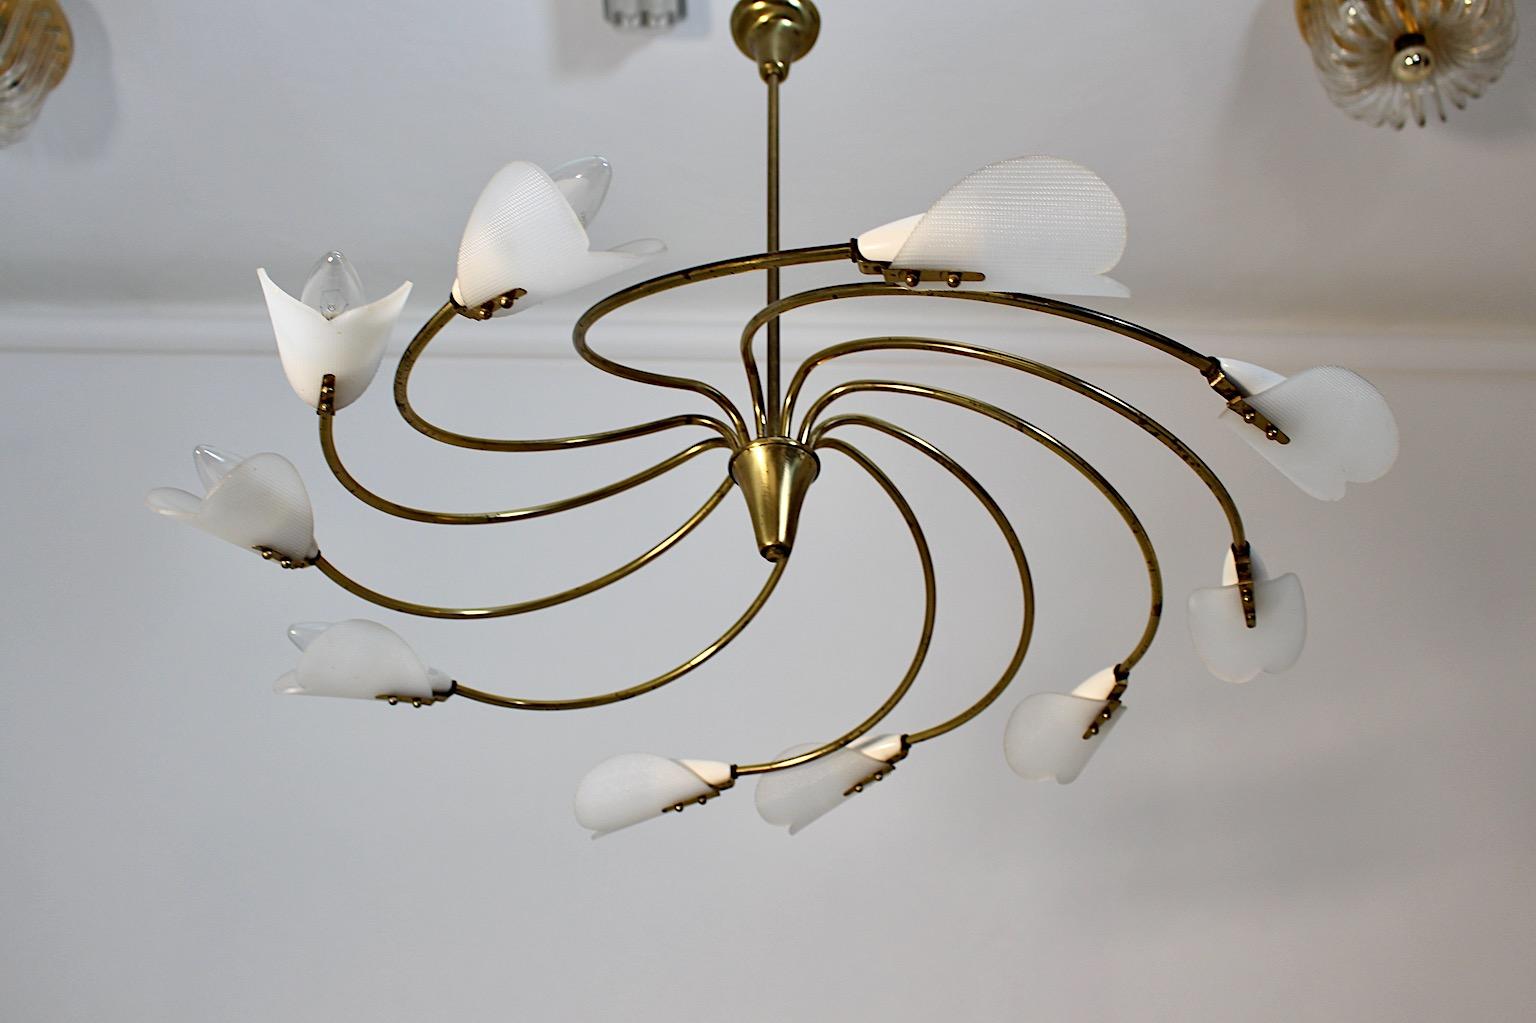 Mid Century Modern vintage chandelier model Tornado by Rupert Nikoll from brass and white plastic, 1950s Vienna.
An amazing circular chandelier with ten ( 10 ) arms and white plastic shades in cone shape showing wonderful movement like a small